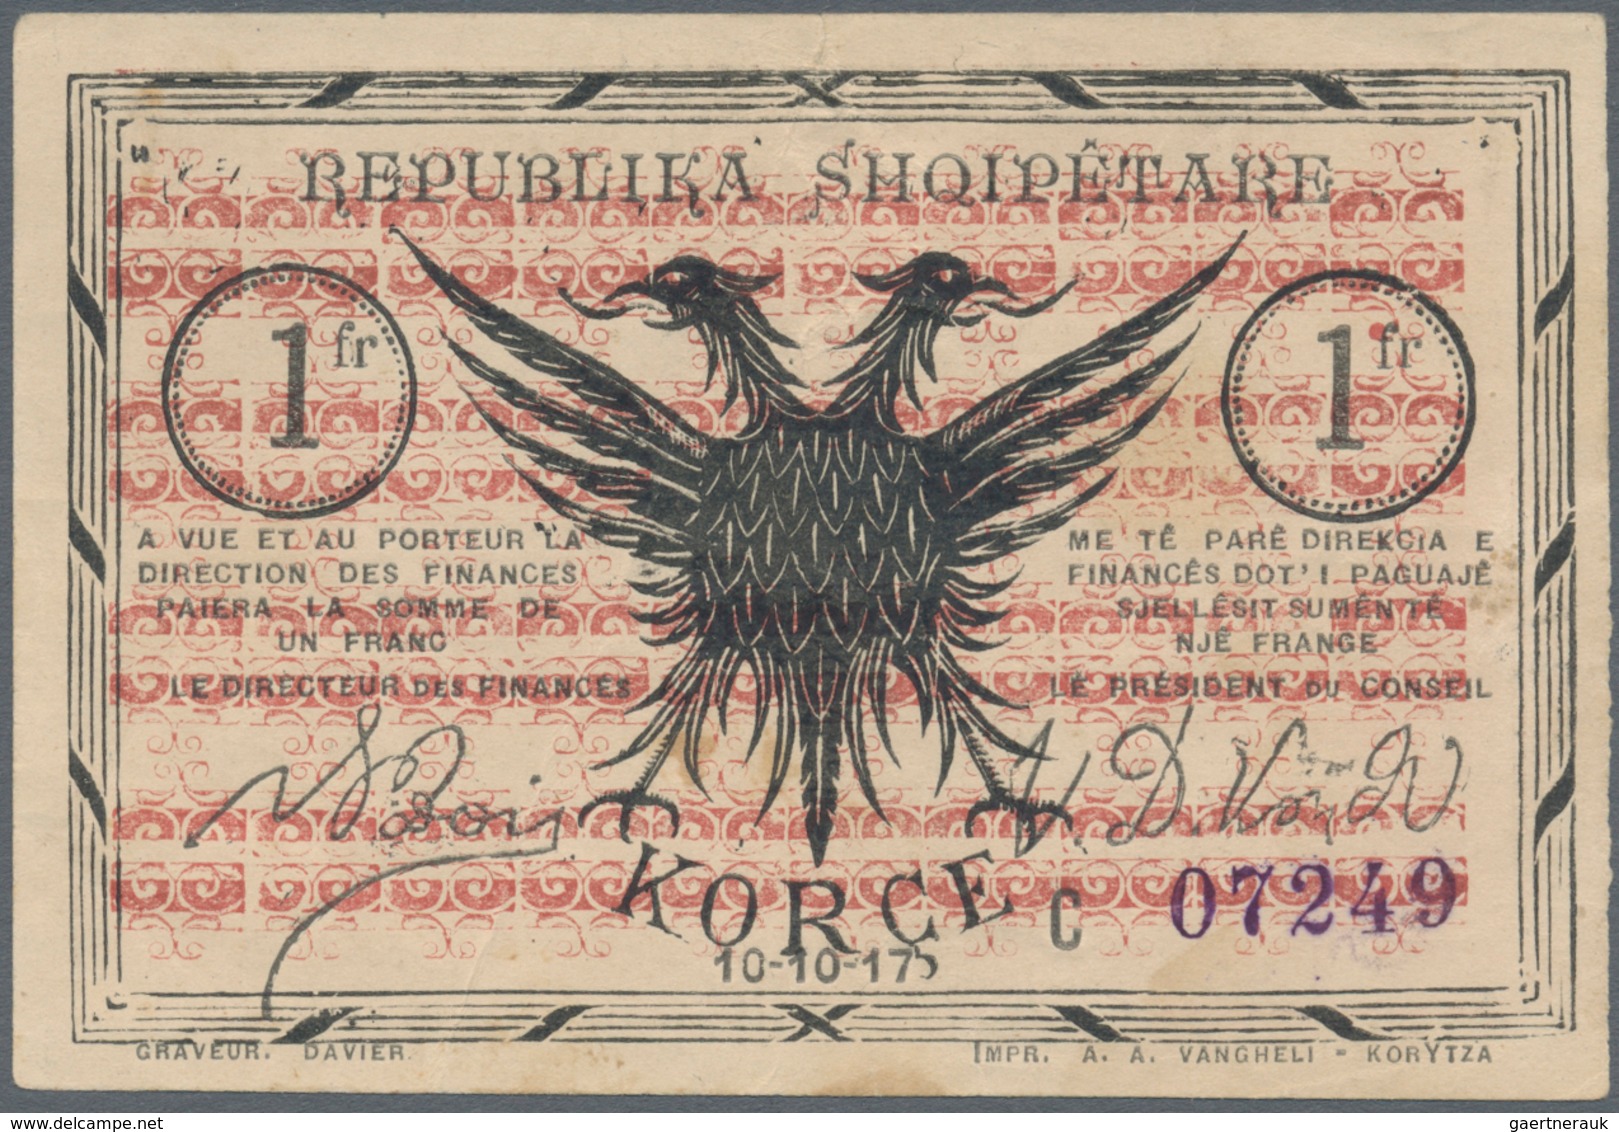 Albania / Albanien: 1 Frang 10.10.1917 P. S146, Used With One Vertical Fold And Light Handling / Din - Albania